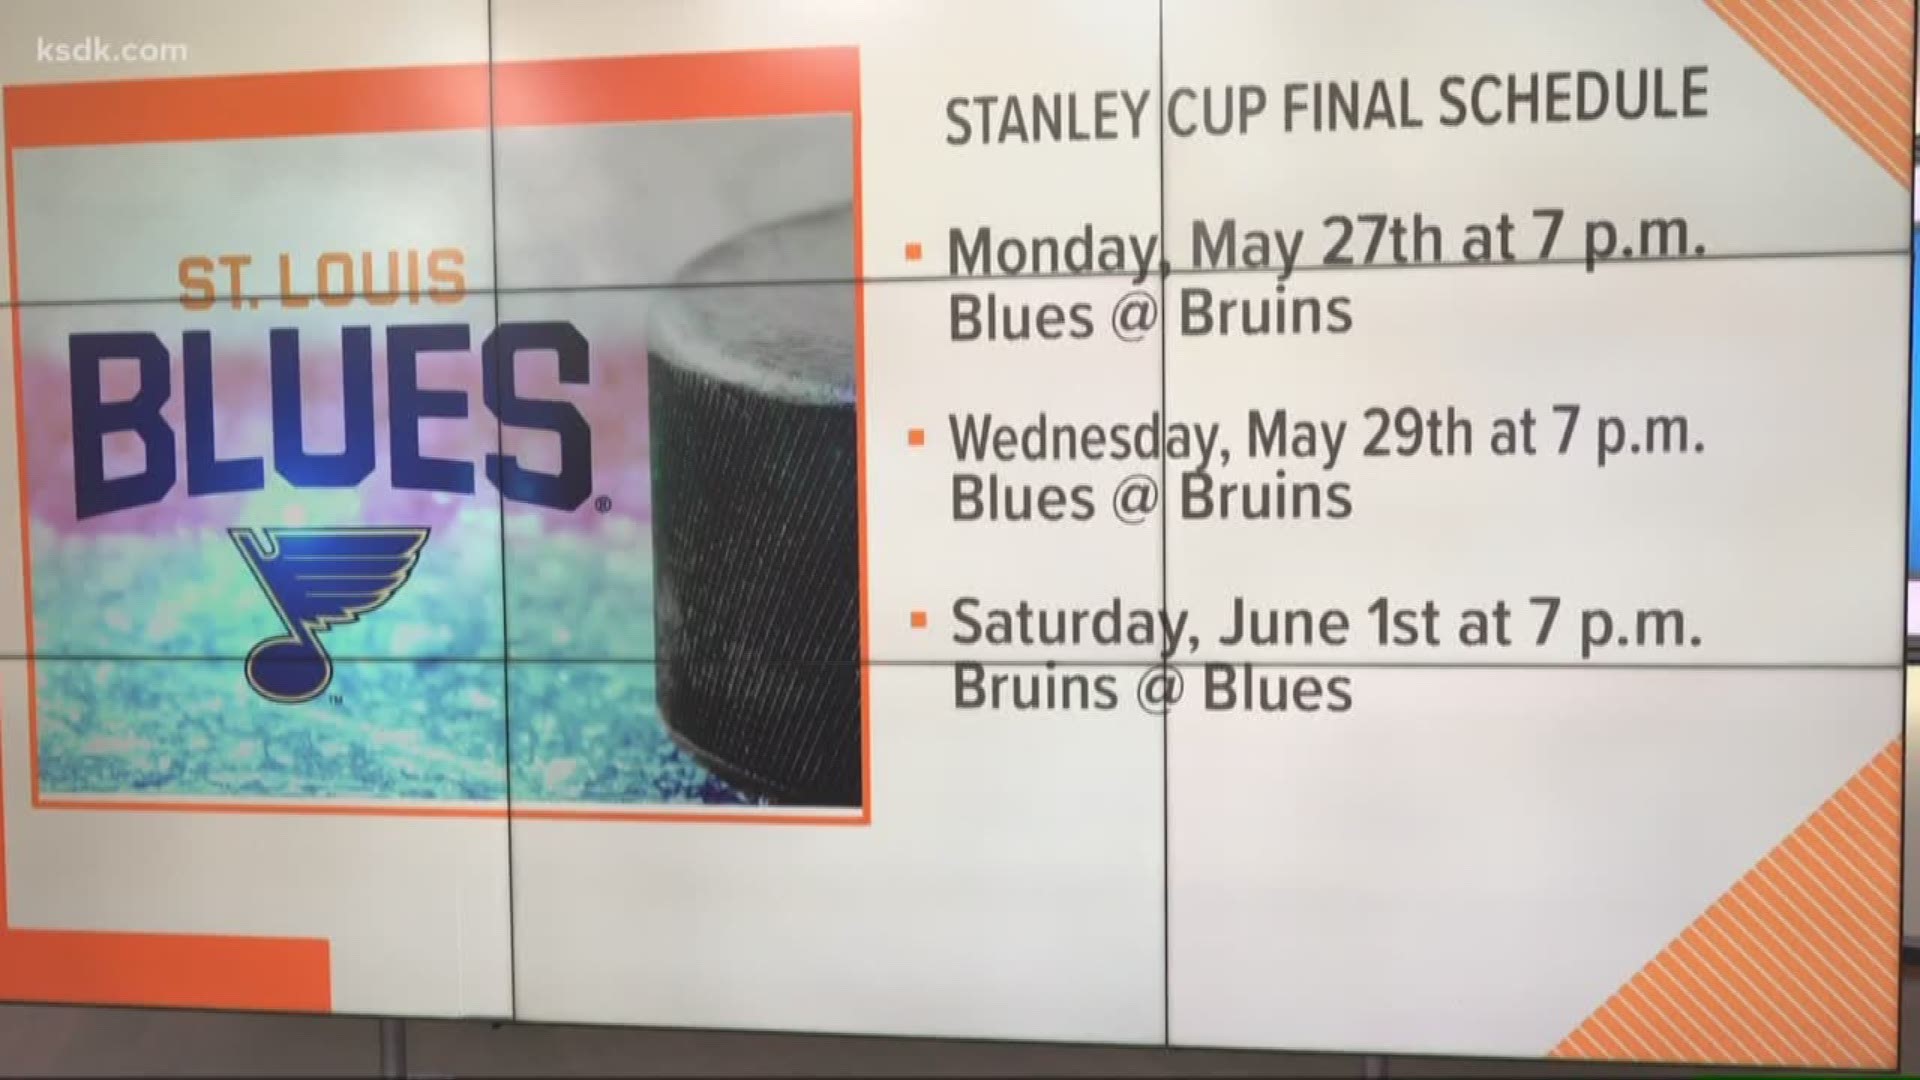 The Blues finally made it to the Stanley Cup Final after beating the San Jose Sharks in Game 6!